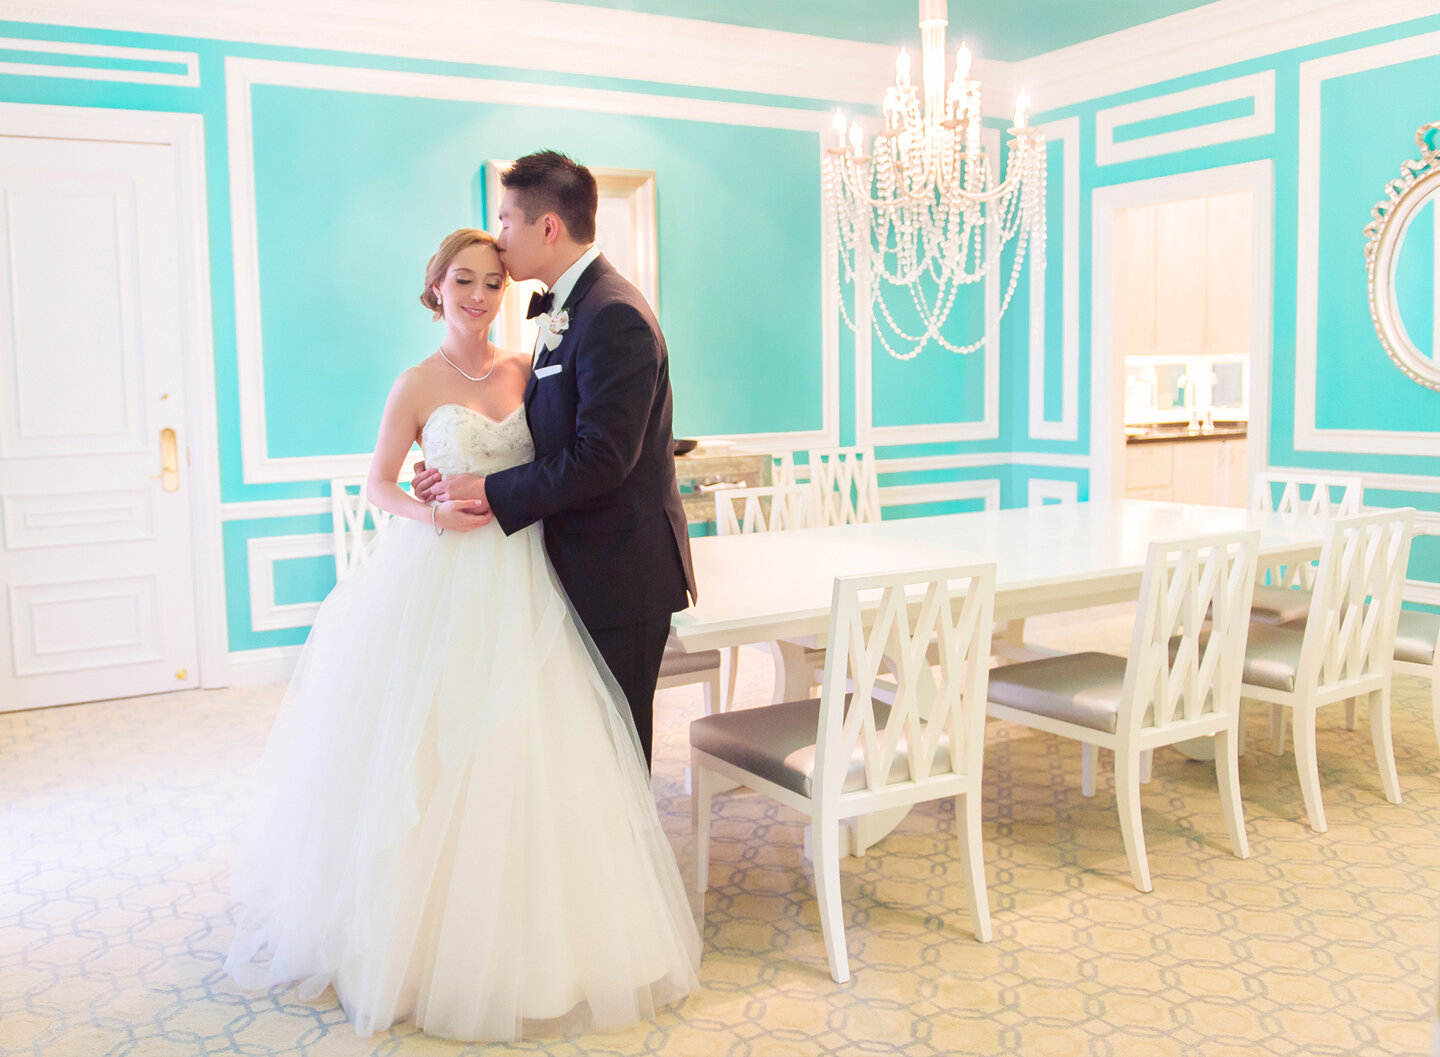 The bride and the groom in Tiffany suite